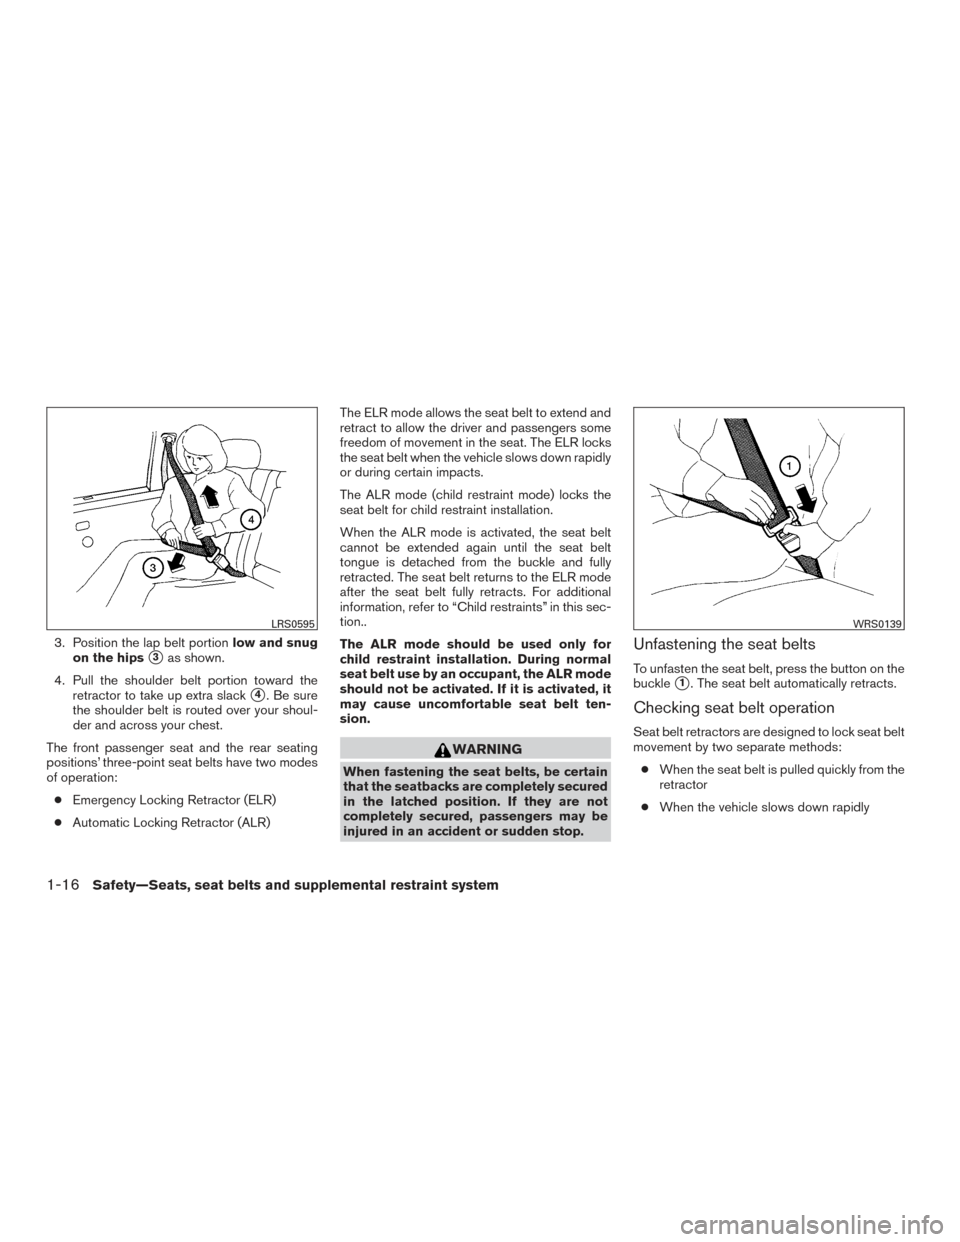 NISSAN ALTIMA 2015 L33 / 5.G Owners Guide 3. Position the lap belt portionlow and snug
on the hips
3as shown.
4. Pull the shoulder belt portion toward the retractor to take up extra slack
4. Be sure
the shoulder belt is routed over your sho